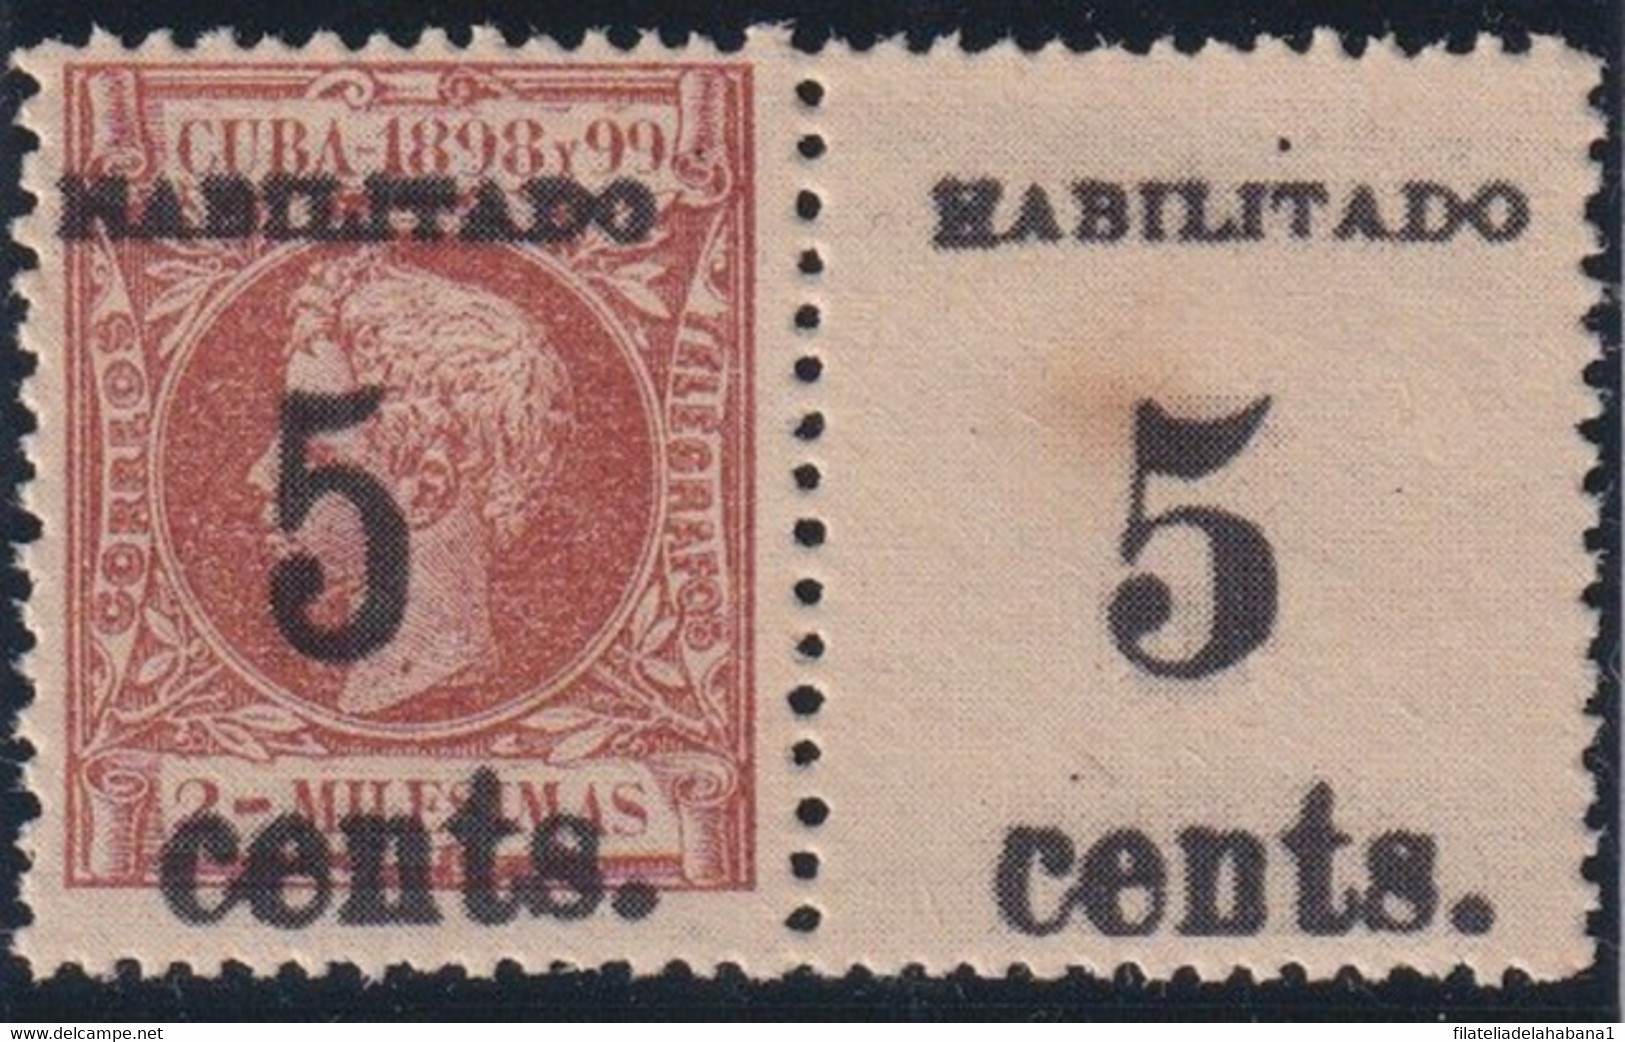 1899-608 CUBA 1899 US OCCUPATION. FORGERY PUERTO PRINCIPE. 2º ISSUE. 5c S. 5 Mls. PAIR NORMAL + SMALL NUMBER. - Ungebraucht